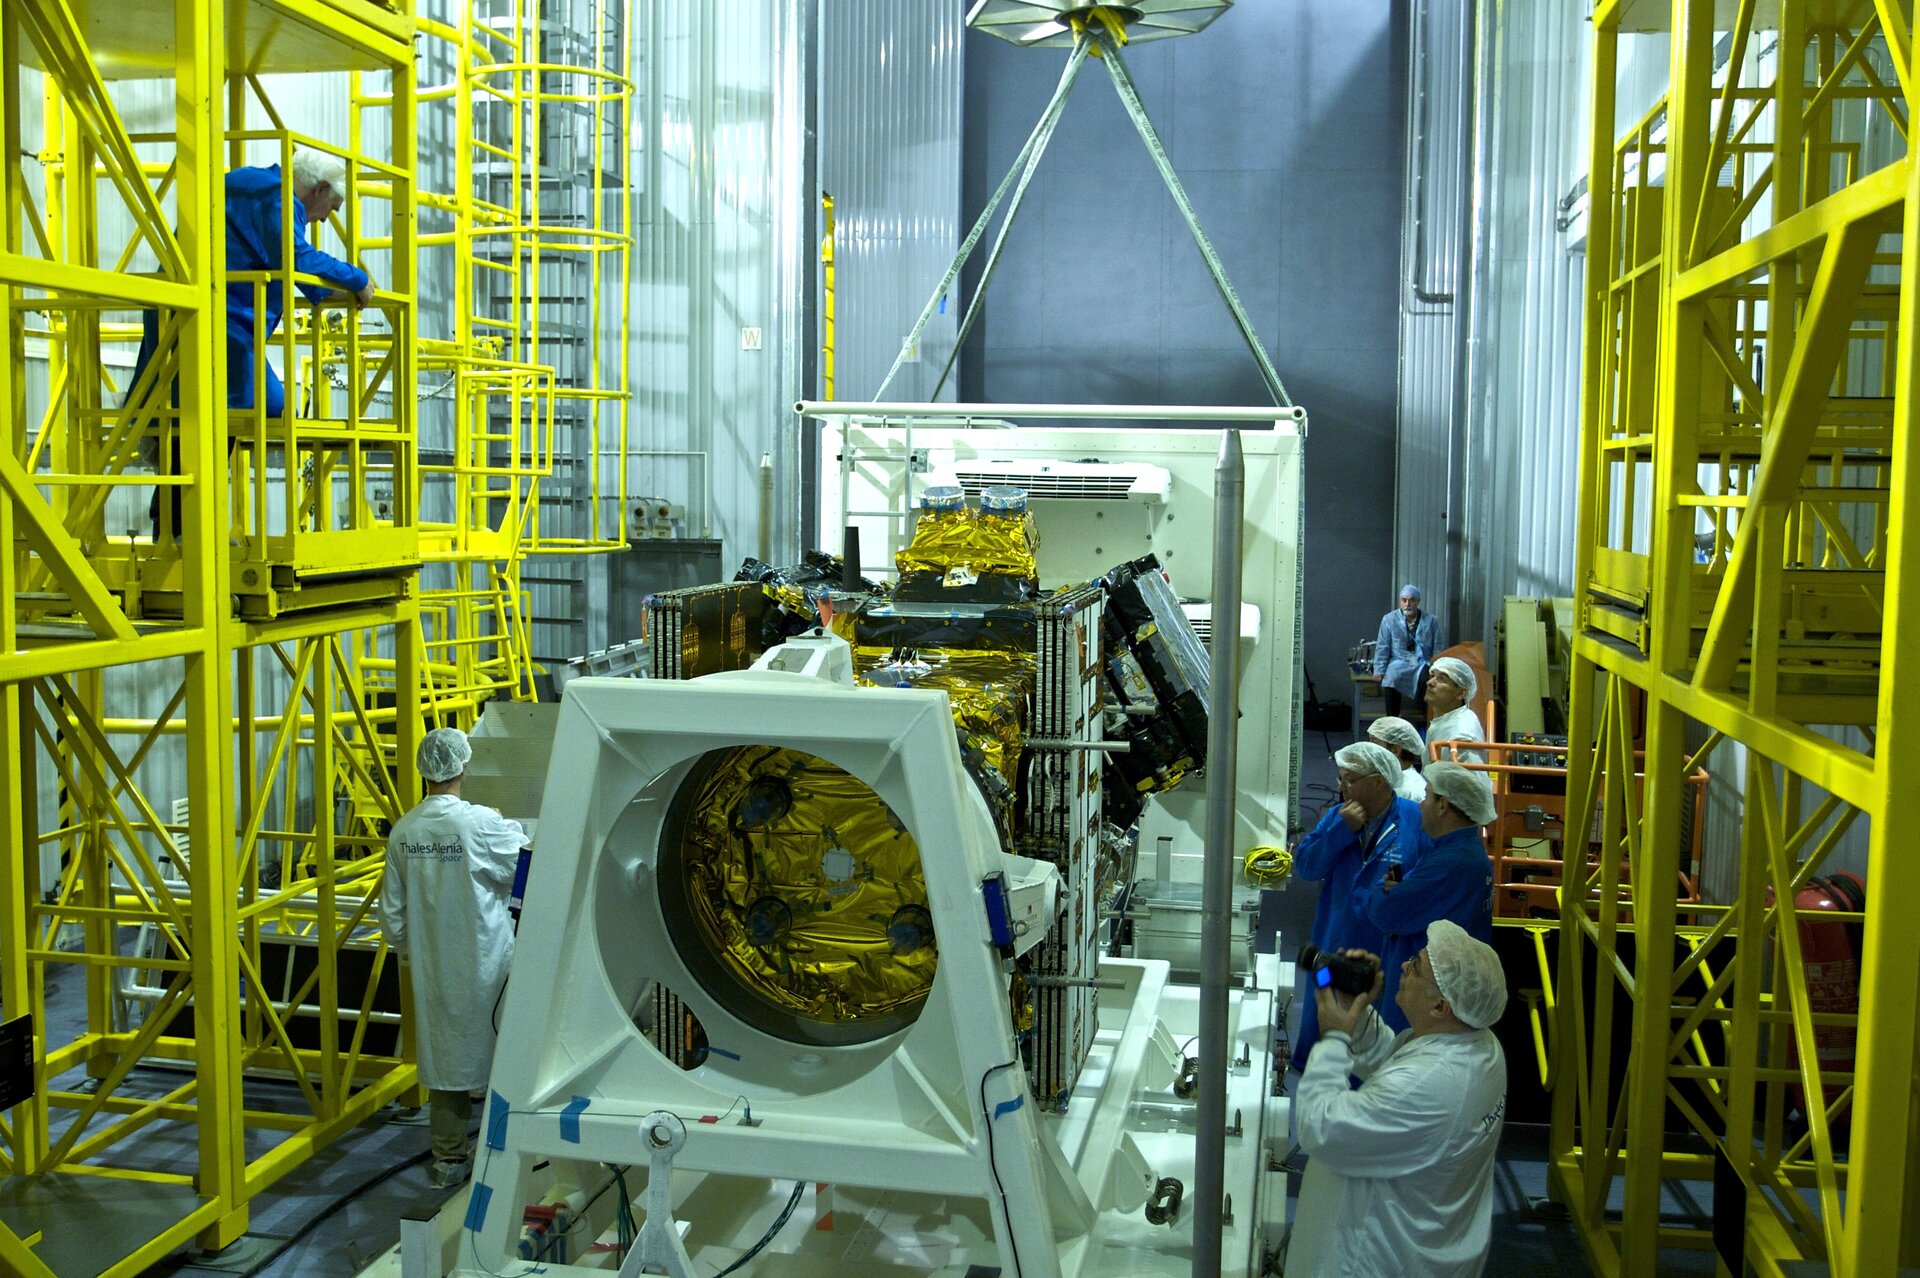 First inspection of SMOS following transit